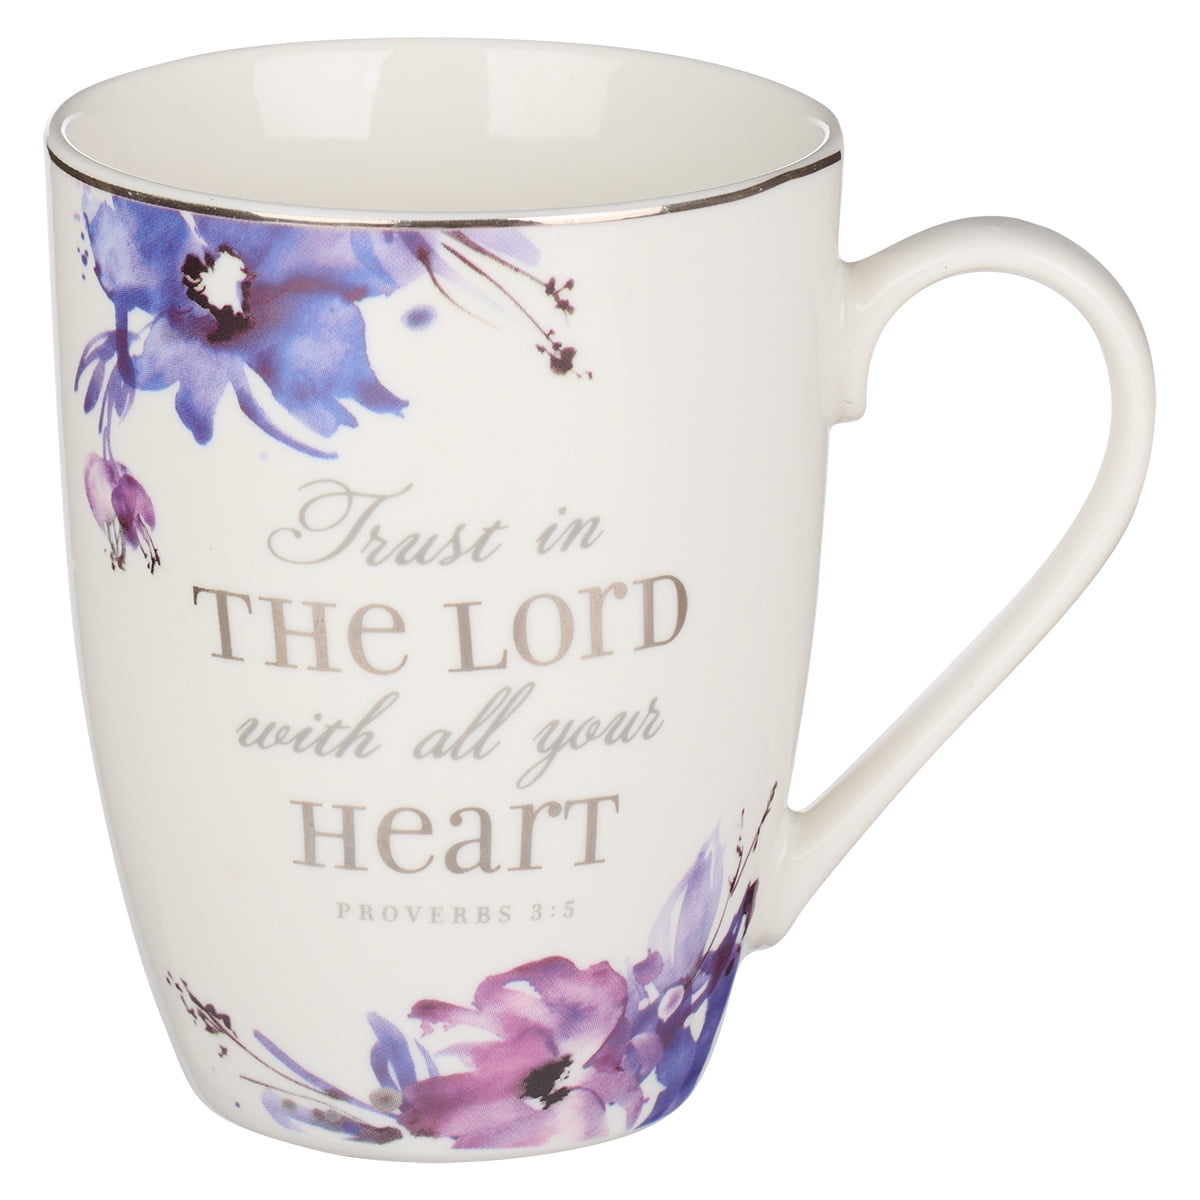 Christian Art Gifts Ceramic Large Coffee & Tea Mug for Men & Women: Blessed  is the One Who Trusts - Jeremiah 17:7 Inspirational Bible Verse w/Golden  Accents & Sturdy Handle, Navy Blue